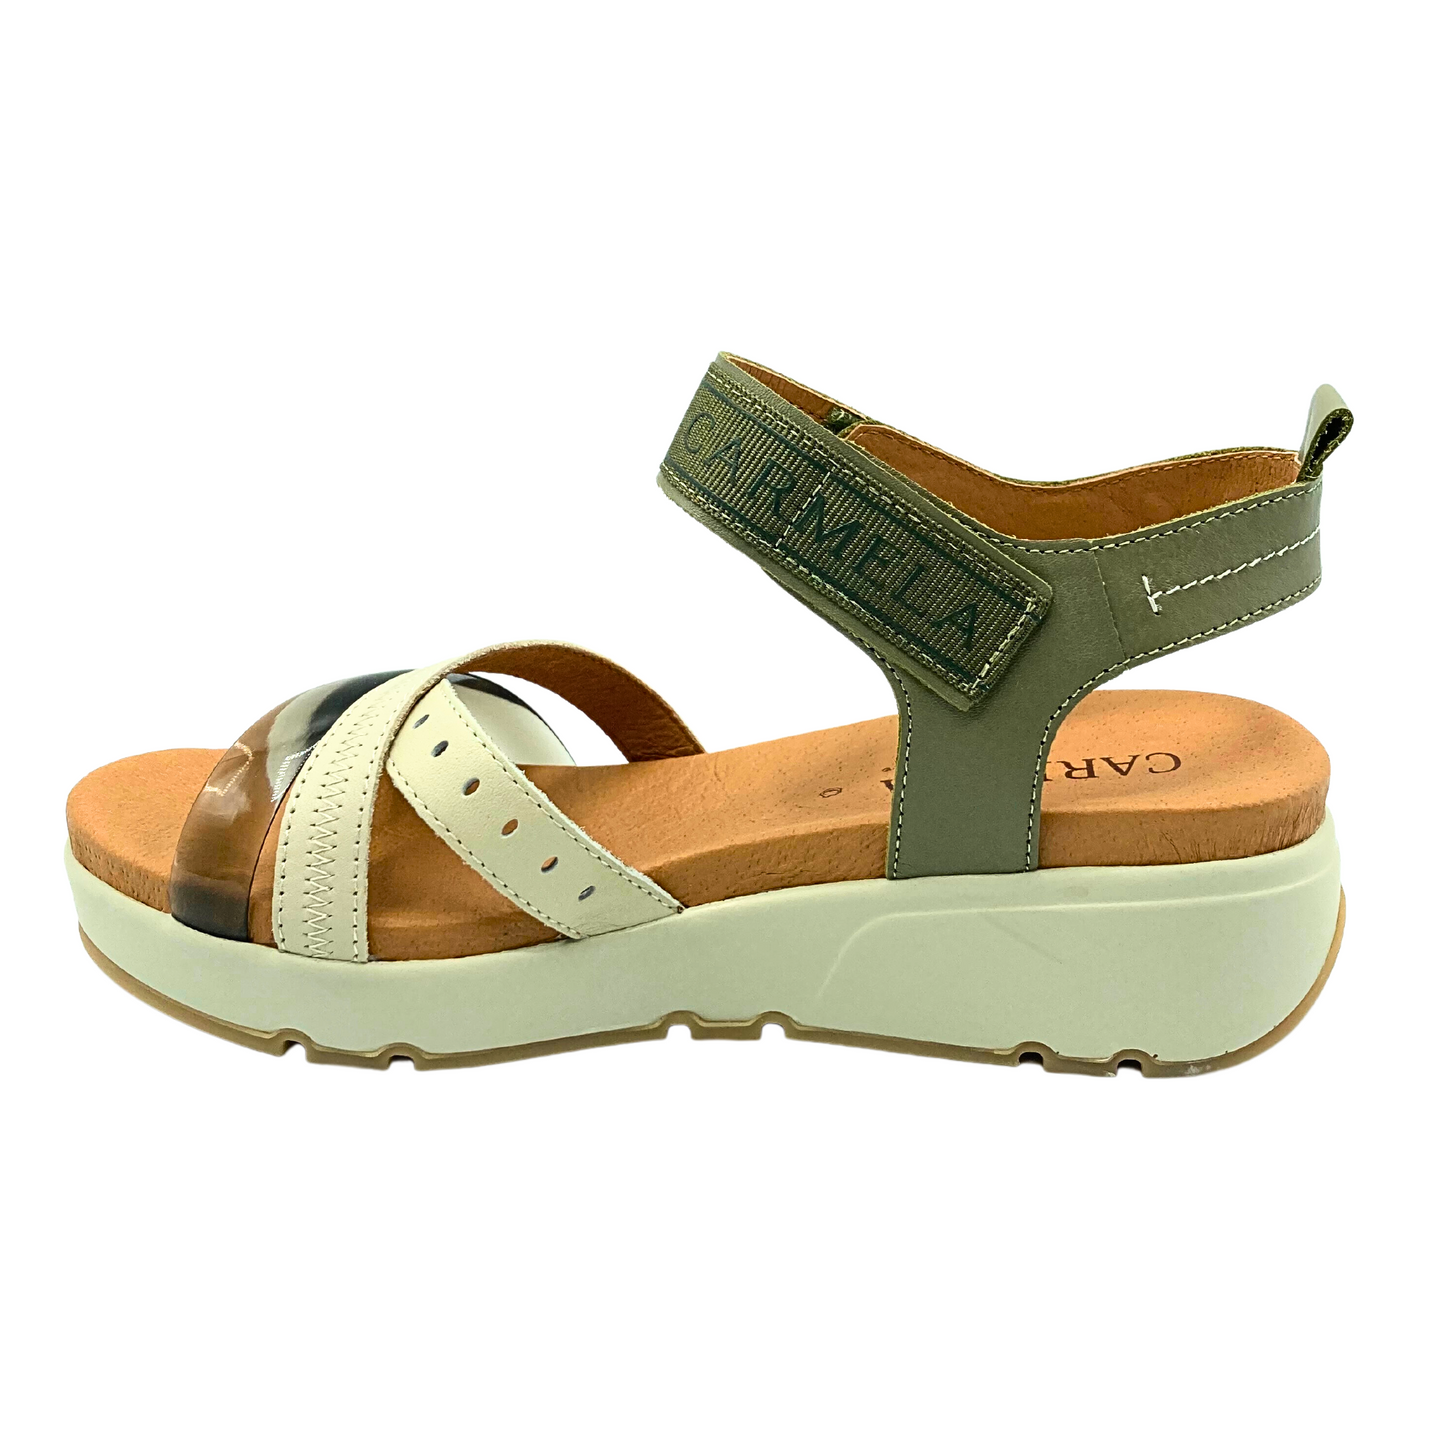 Inside view of low platform sandal in cream and khaki.  Three interwoven straps at front and both an ankle and heel strap